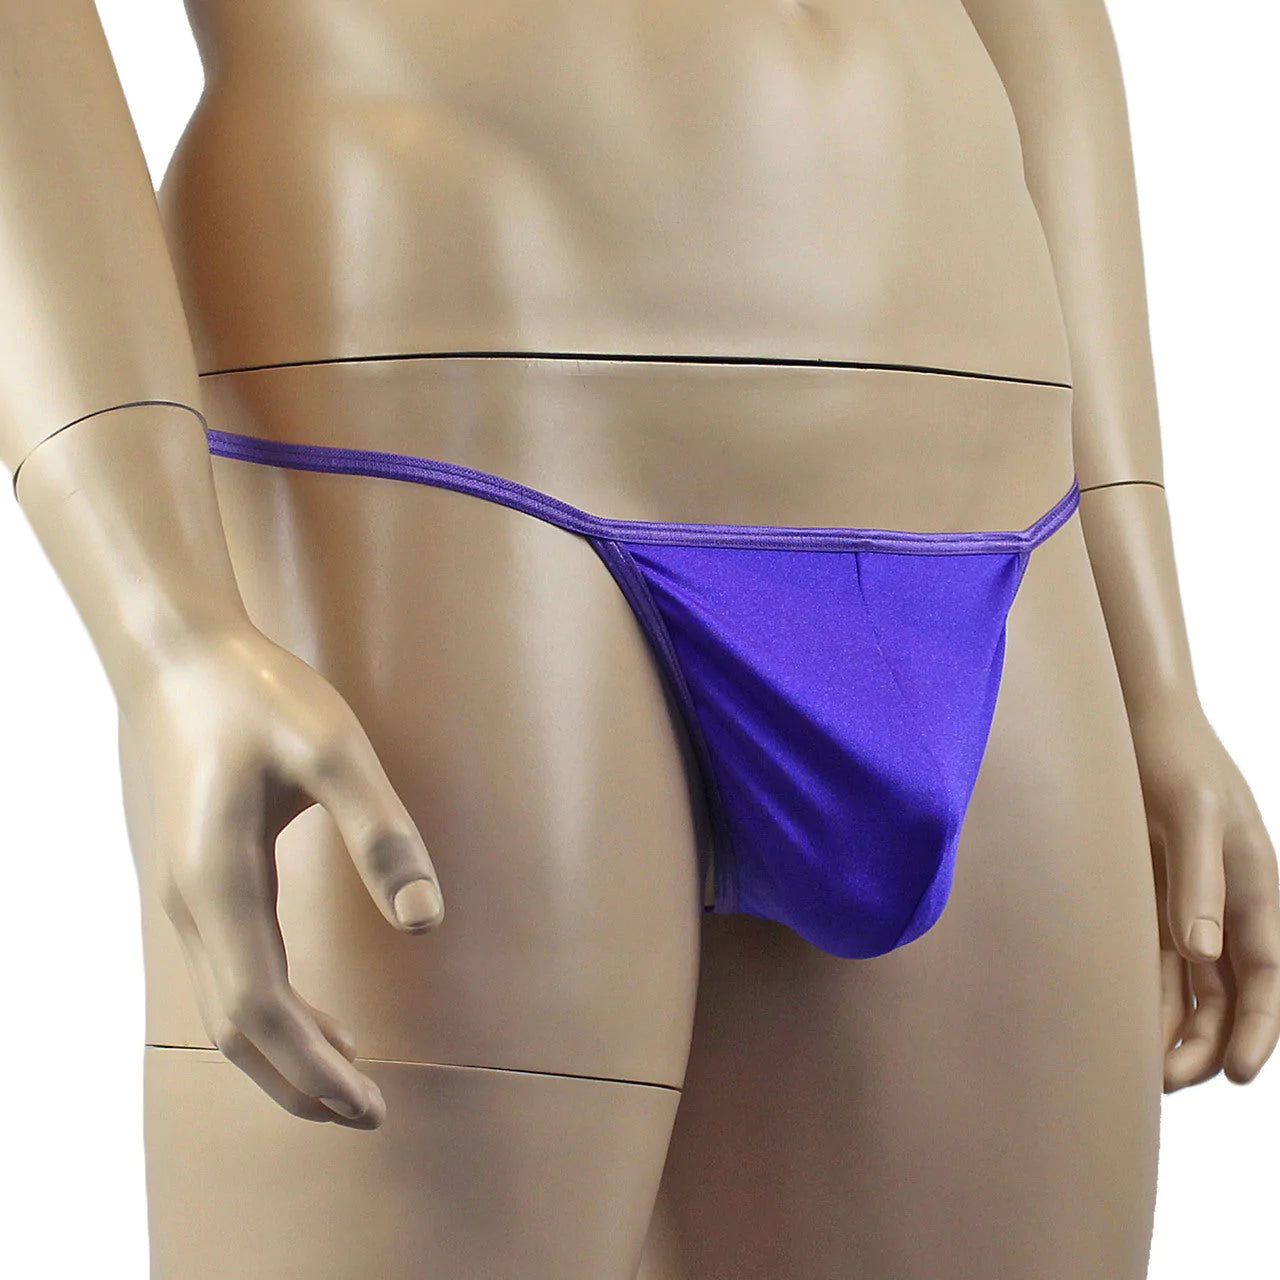 SALE - Mens Mick Keep It Simple Spandex Pouch G string with Thin Elastic Purple